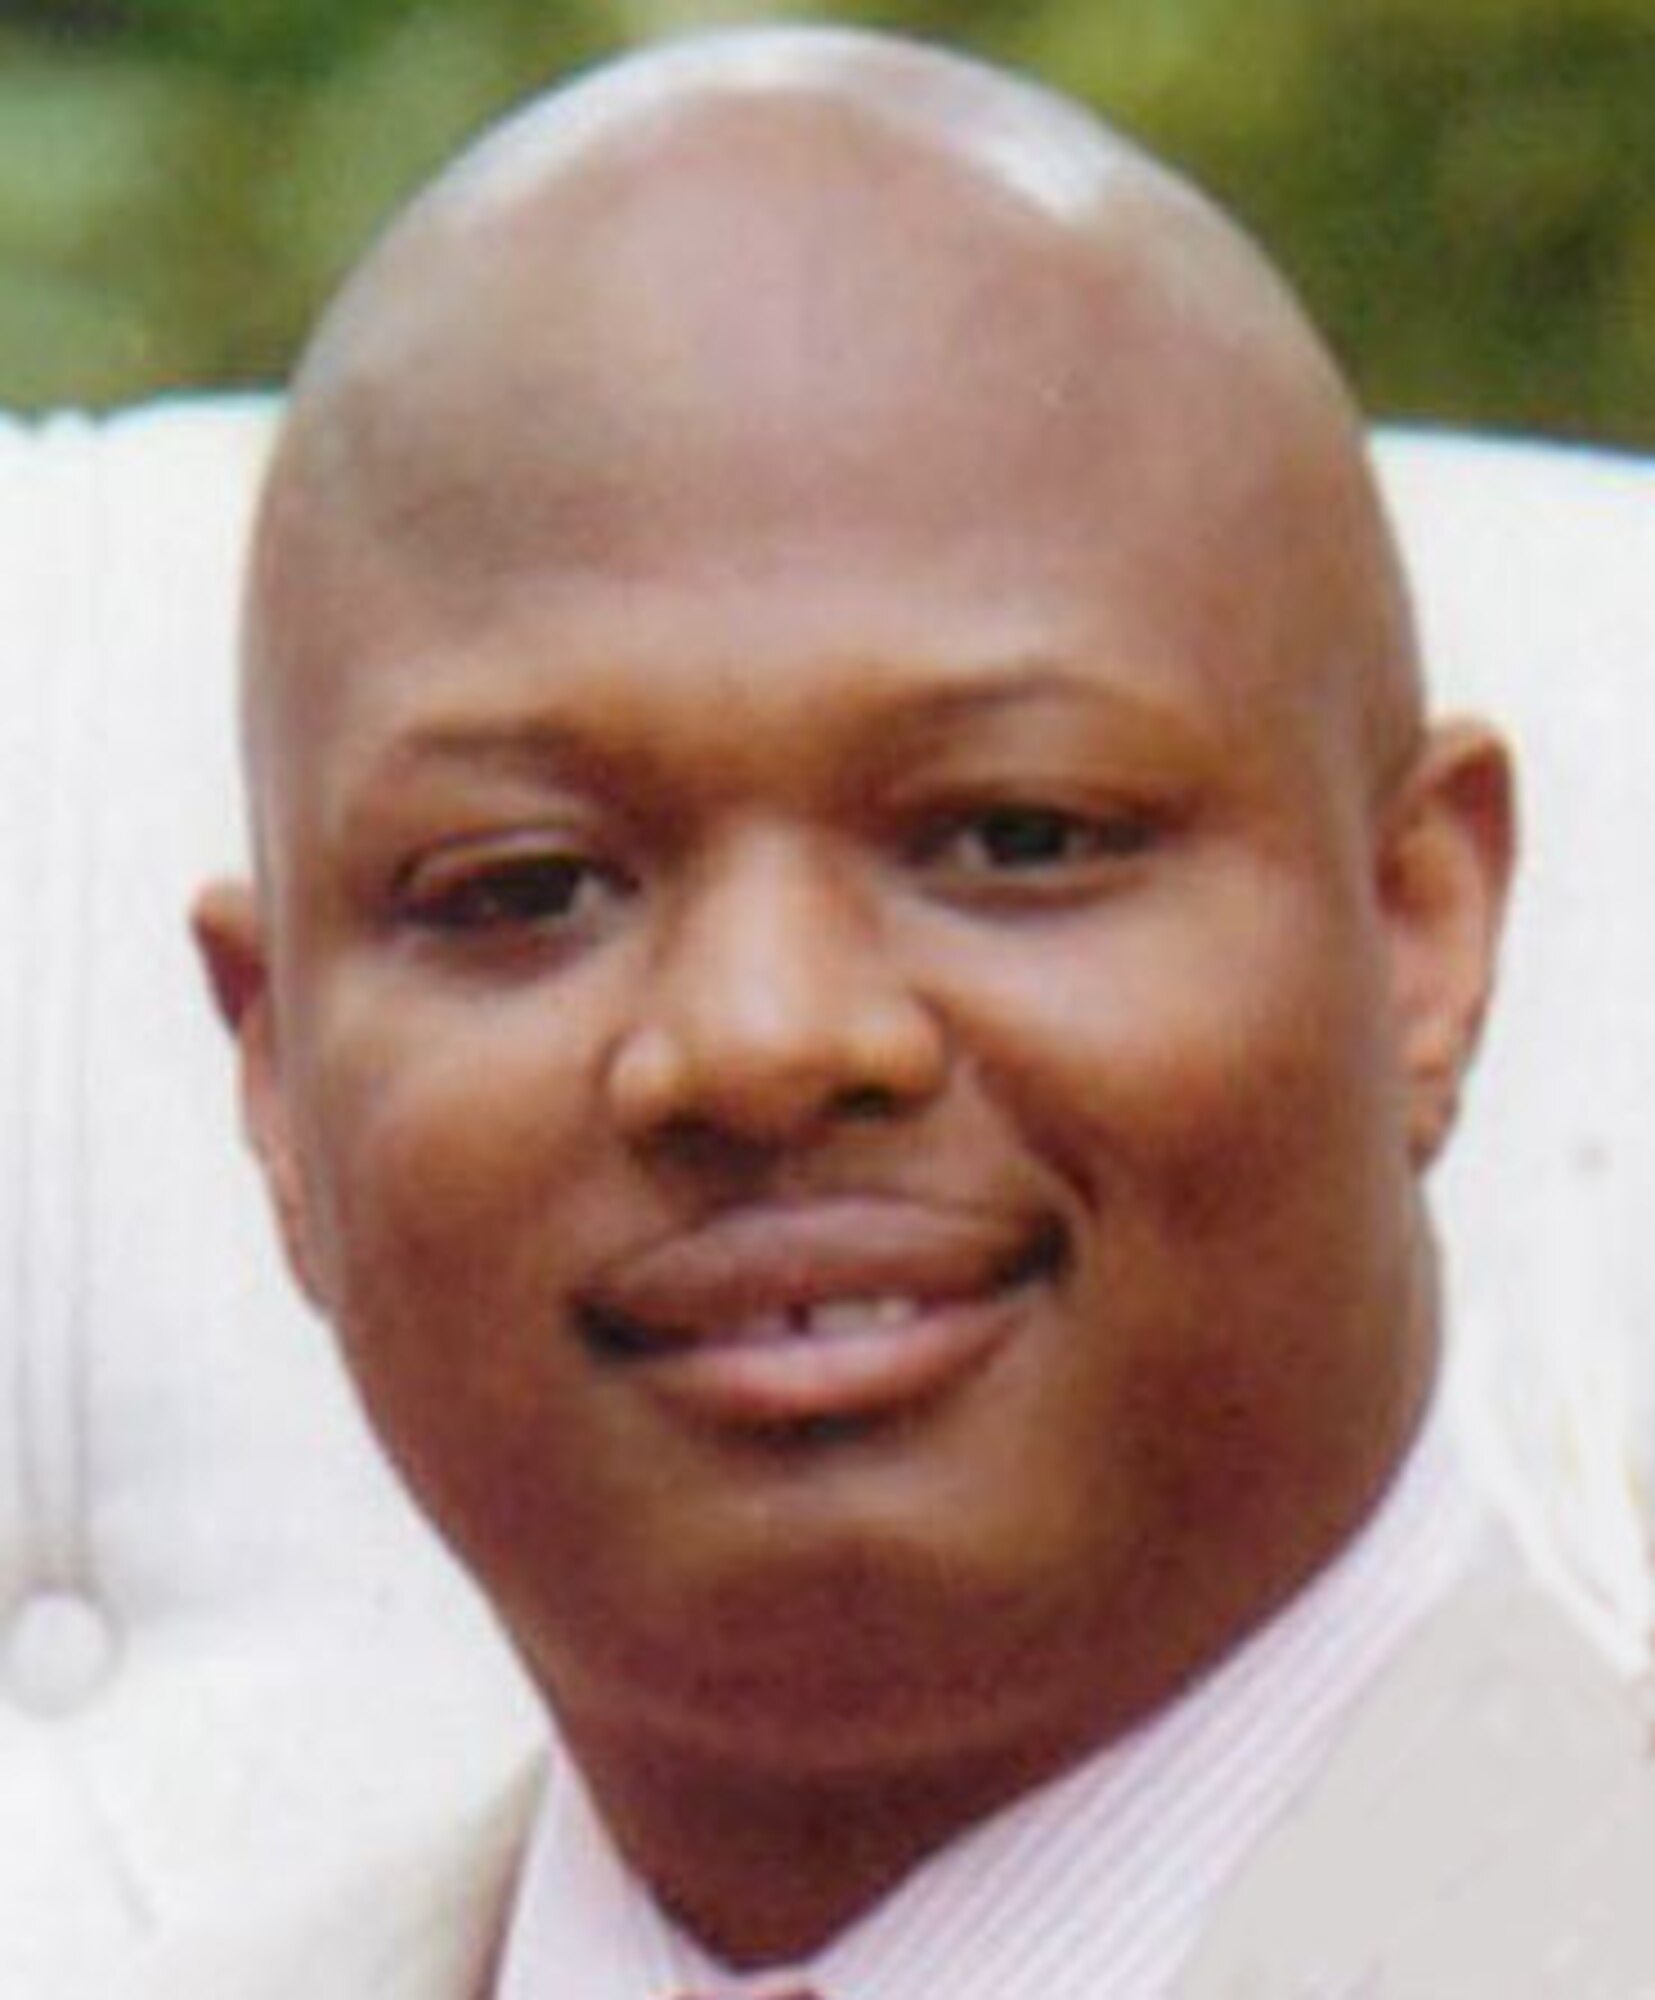 On Jan. 22, 2016, Air Force Technical Sergeant Wiley R. Davis, 38, Information Management Specialist, assigned to Air Force Office of Special Investigations at the U.S. Air Force Special Investigations Academy, Glynco, Ga., was accidentally killed at home. Tech. Sgt. Davis was working on an automobile at his residence when it slid off jack stands crushing him beneath the vehicle.

